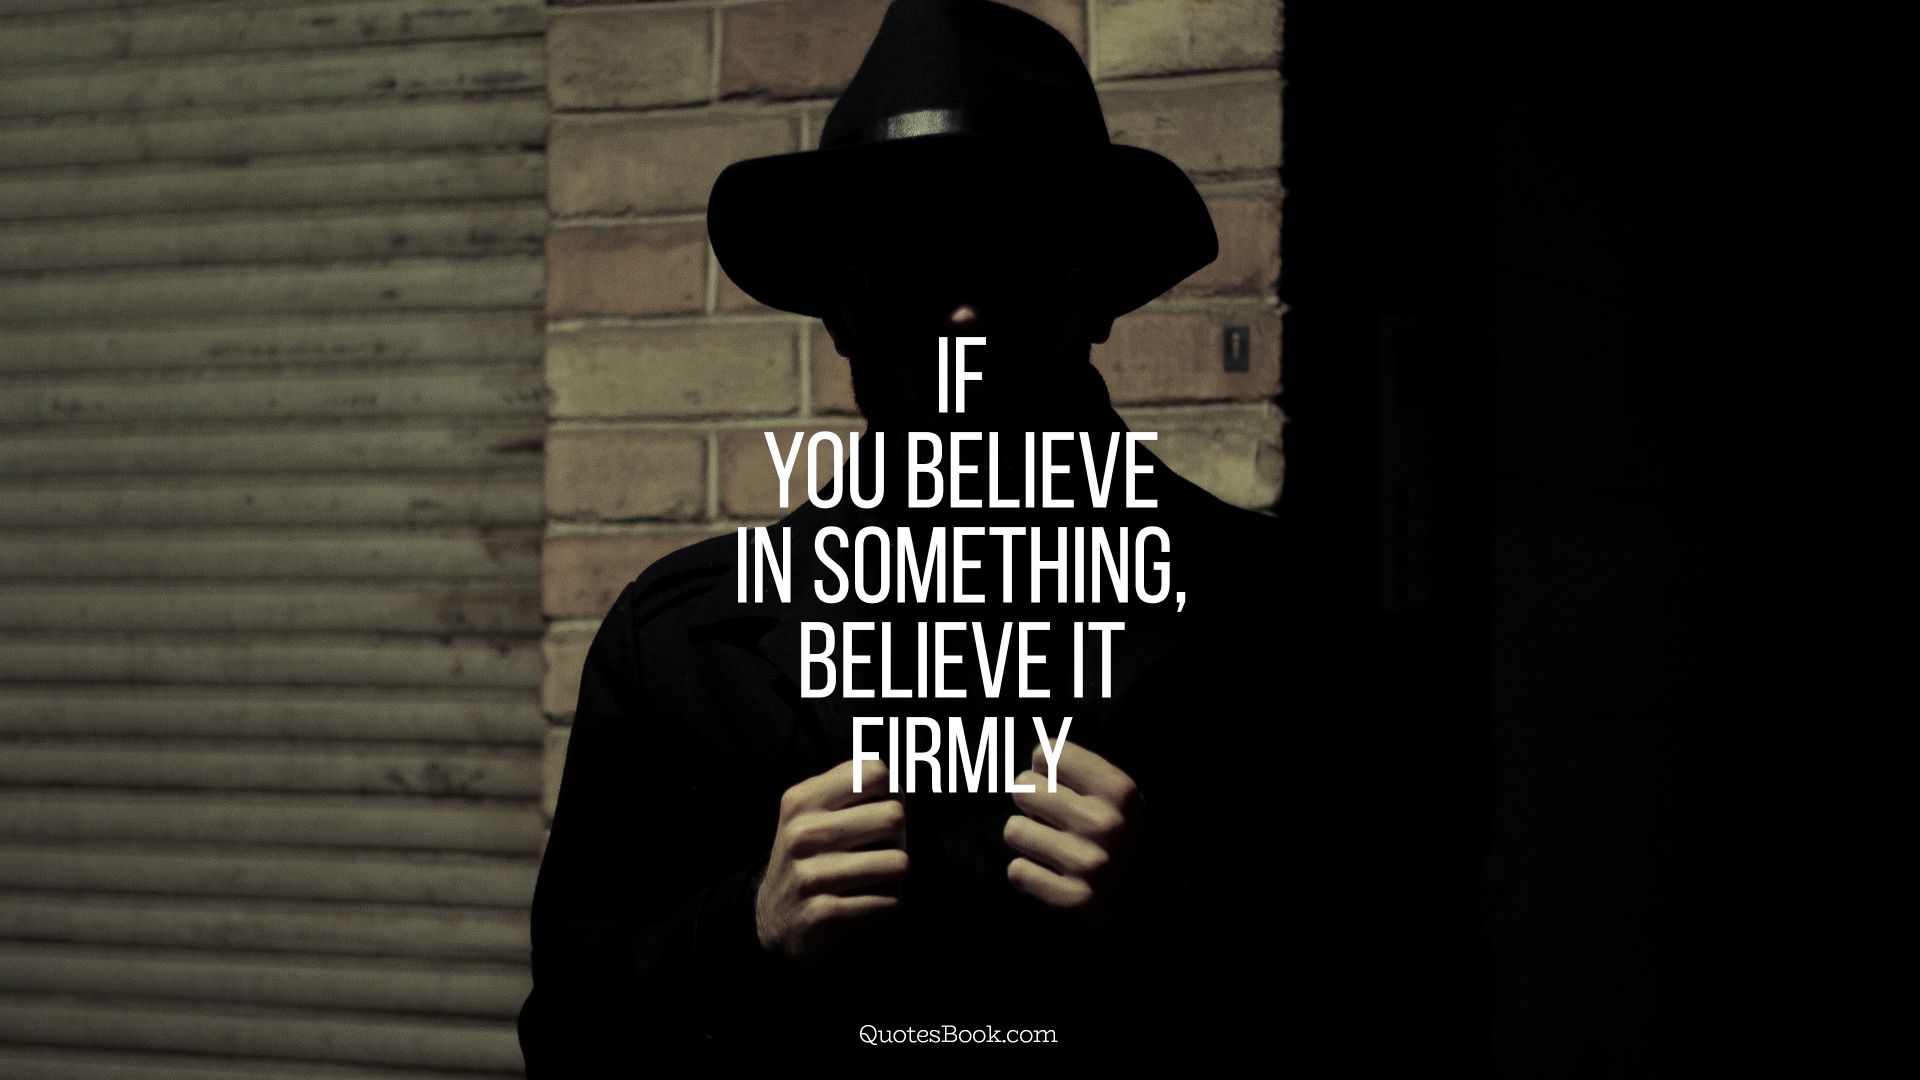 If you believe in something, believe it firmly. - Quote by Tony Mendez